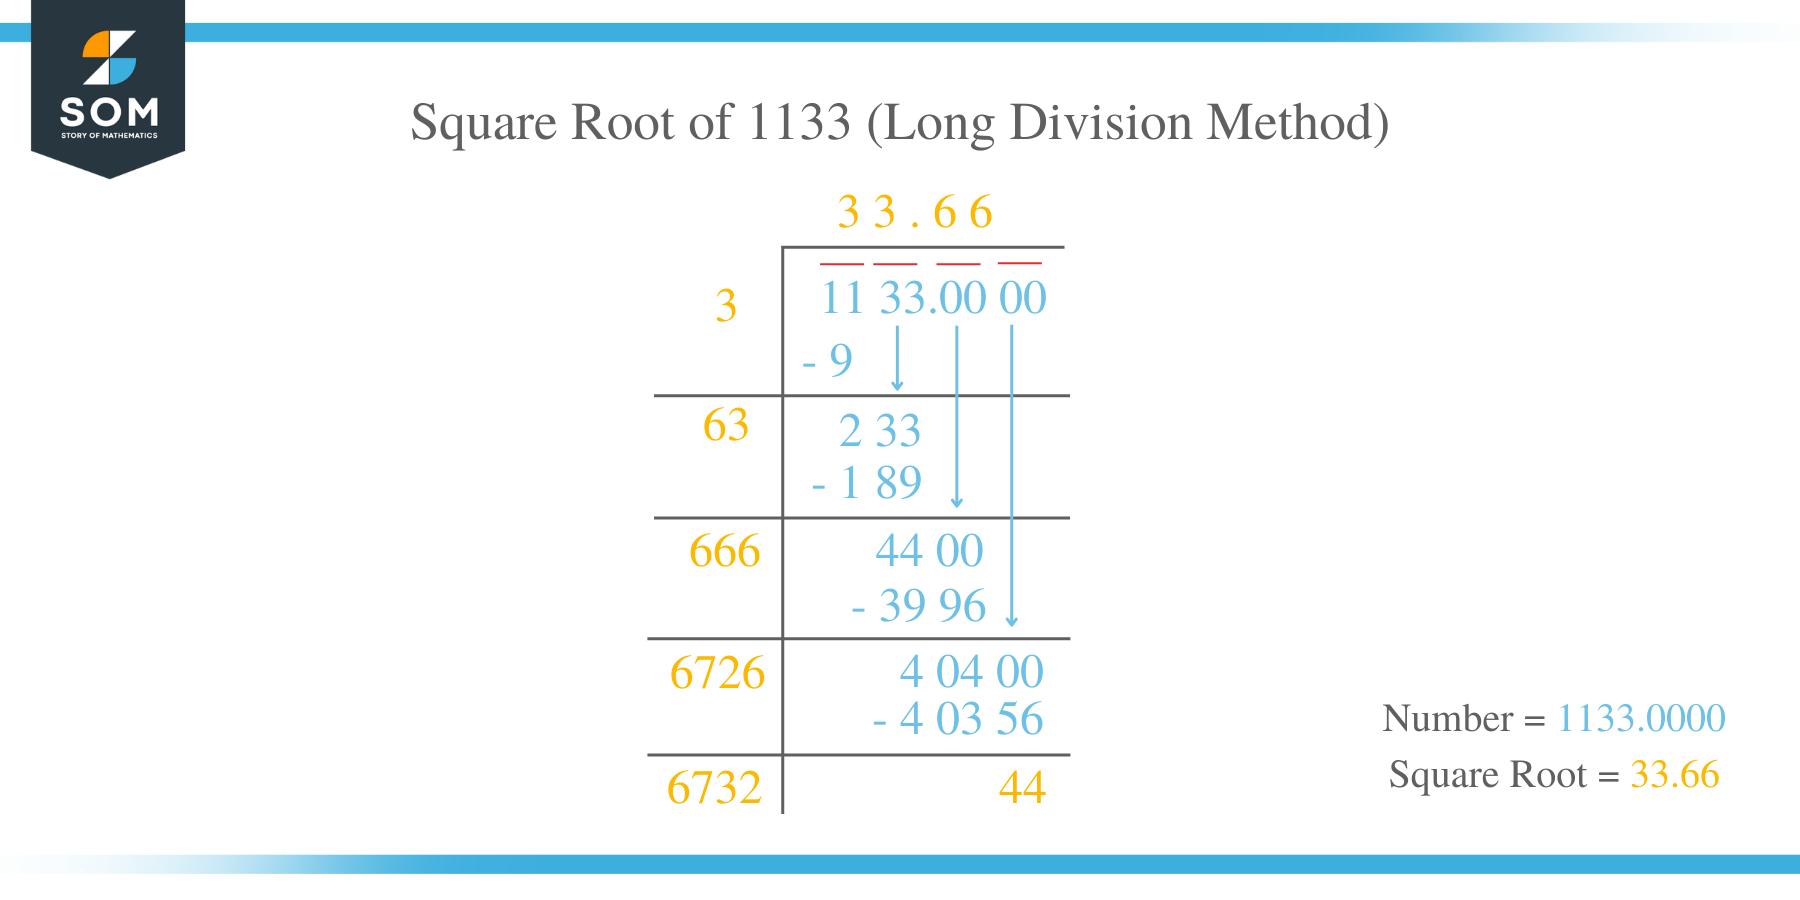 Square Root of 1133 by Long Division Method